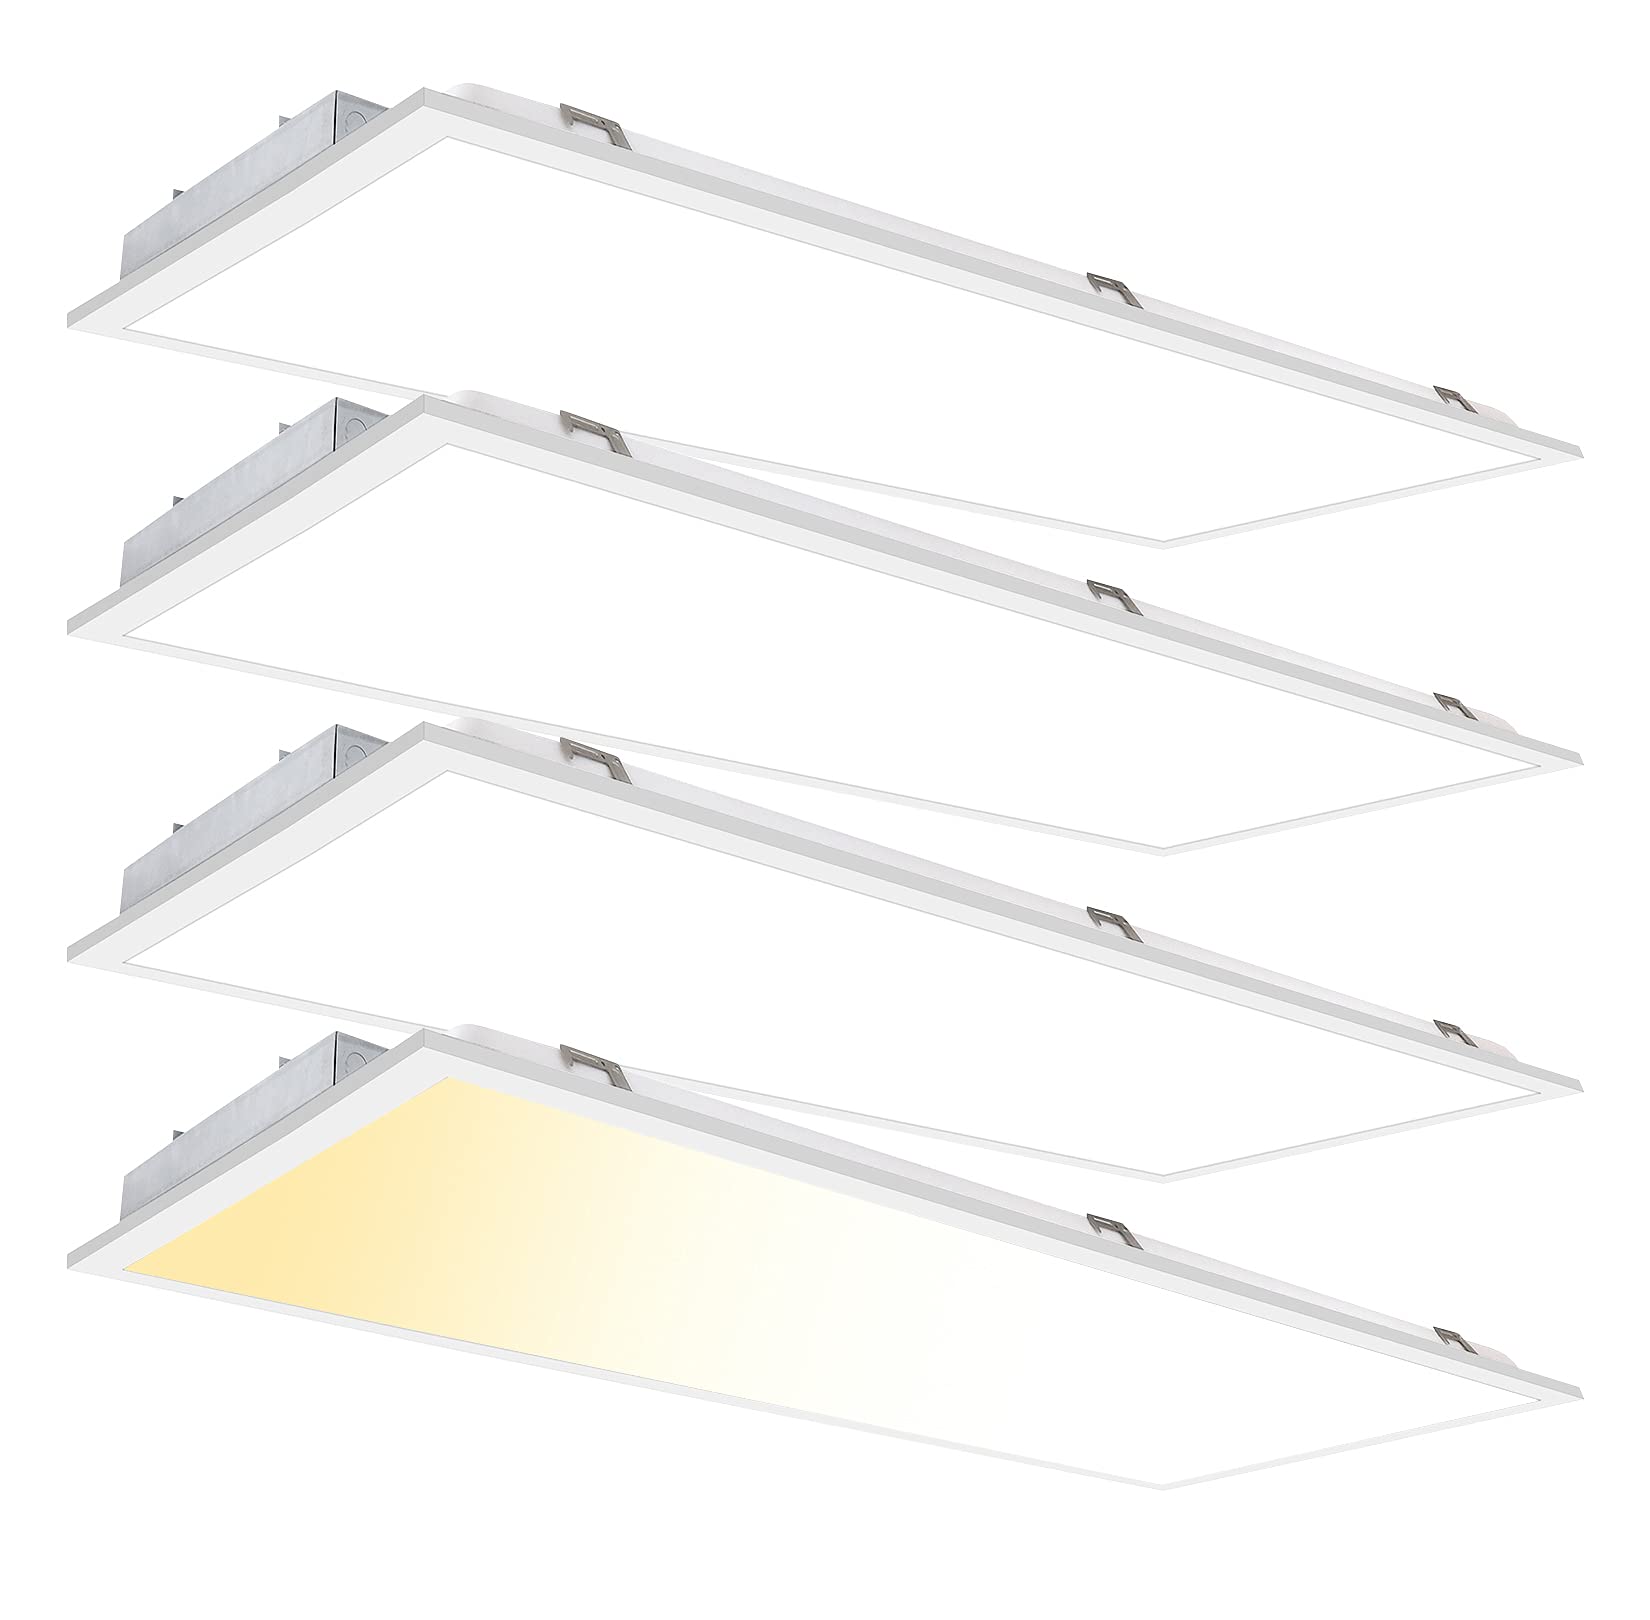 cycevSun 2x4 FT LED Flat Panel Light Drop ceiling 50W 3000K-4000K-5000K Selectable - 0-10V Dimmable 24x48 Inch Back-lit Suspende